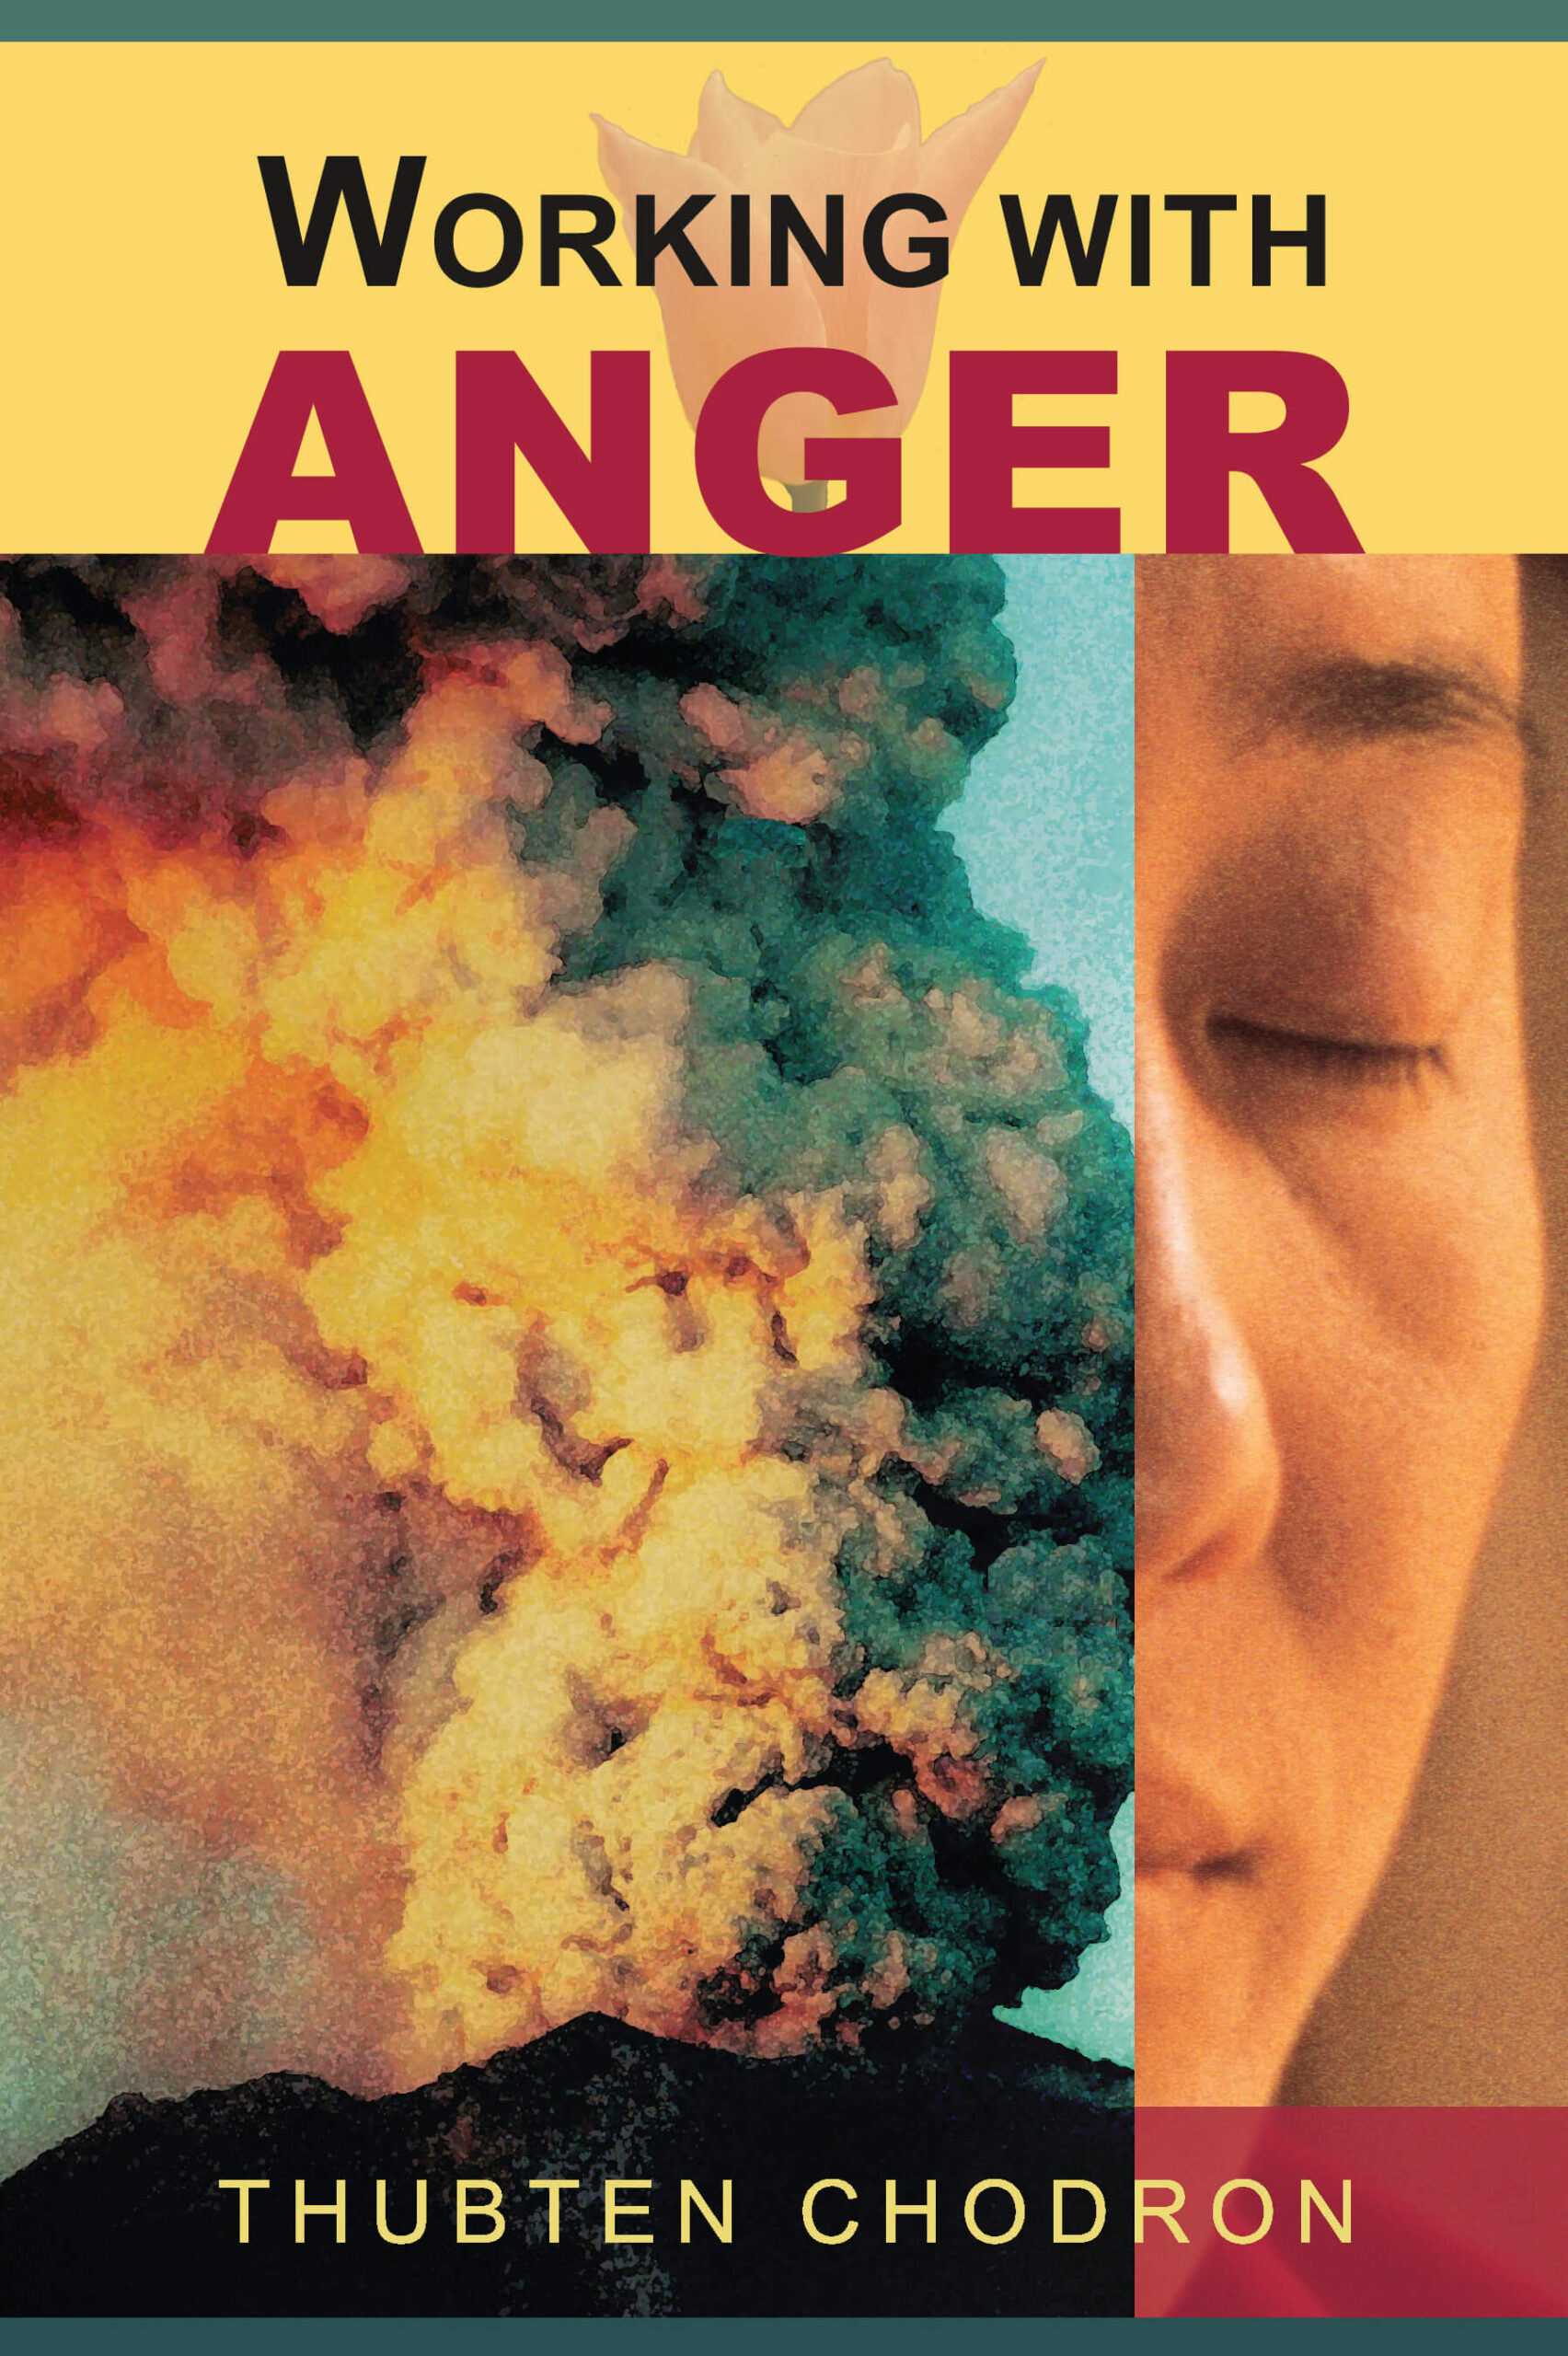 Relating to Fear, Anger, and Conflict: A Reader’s Guide